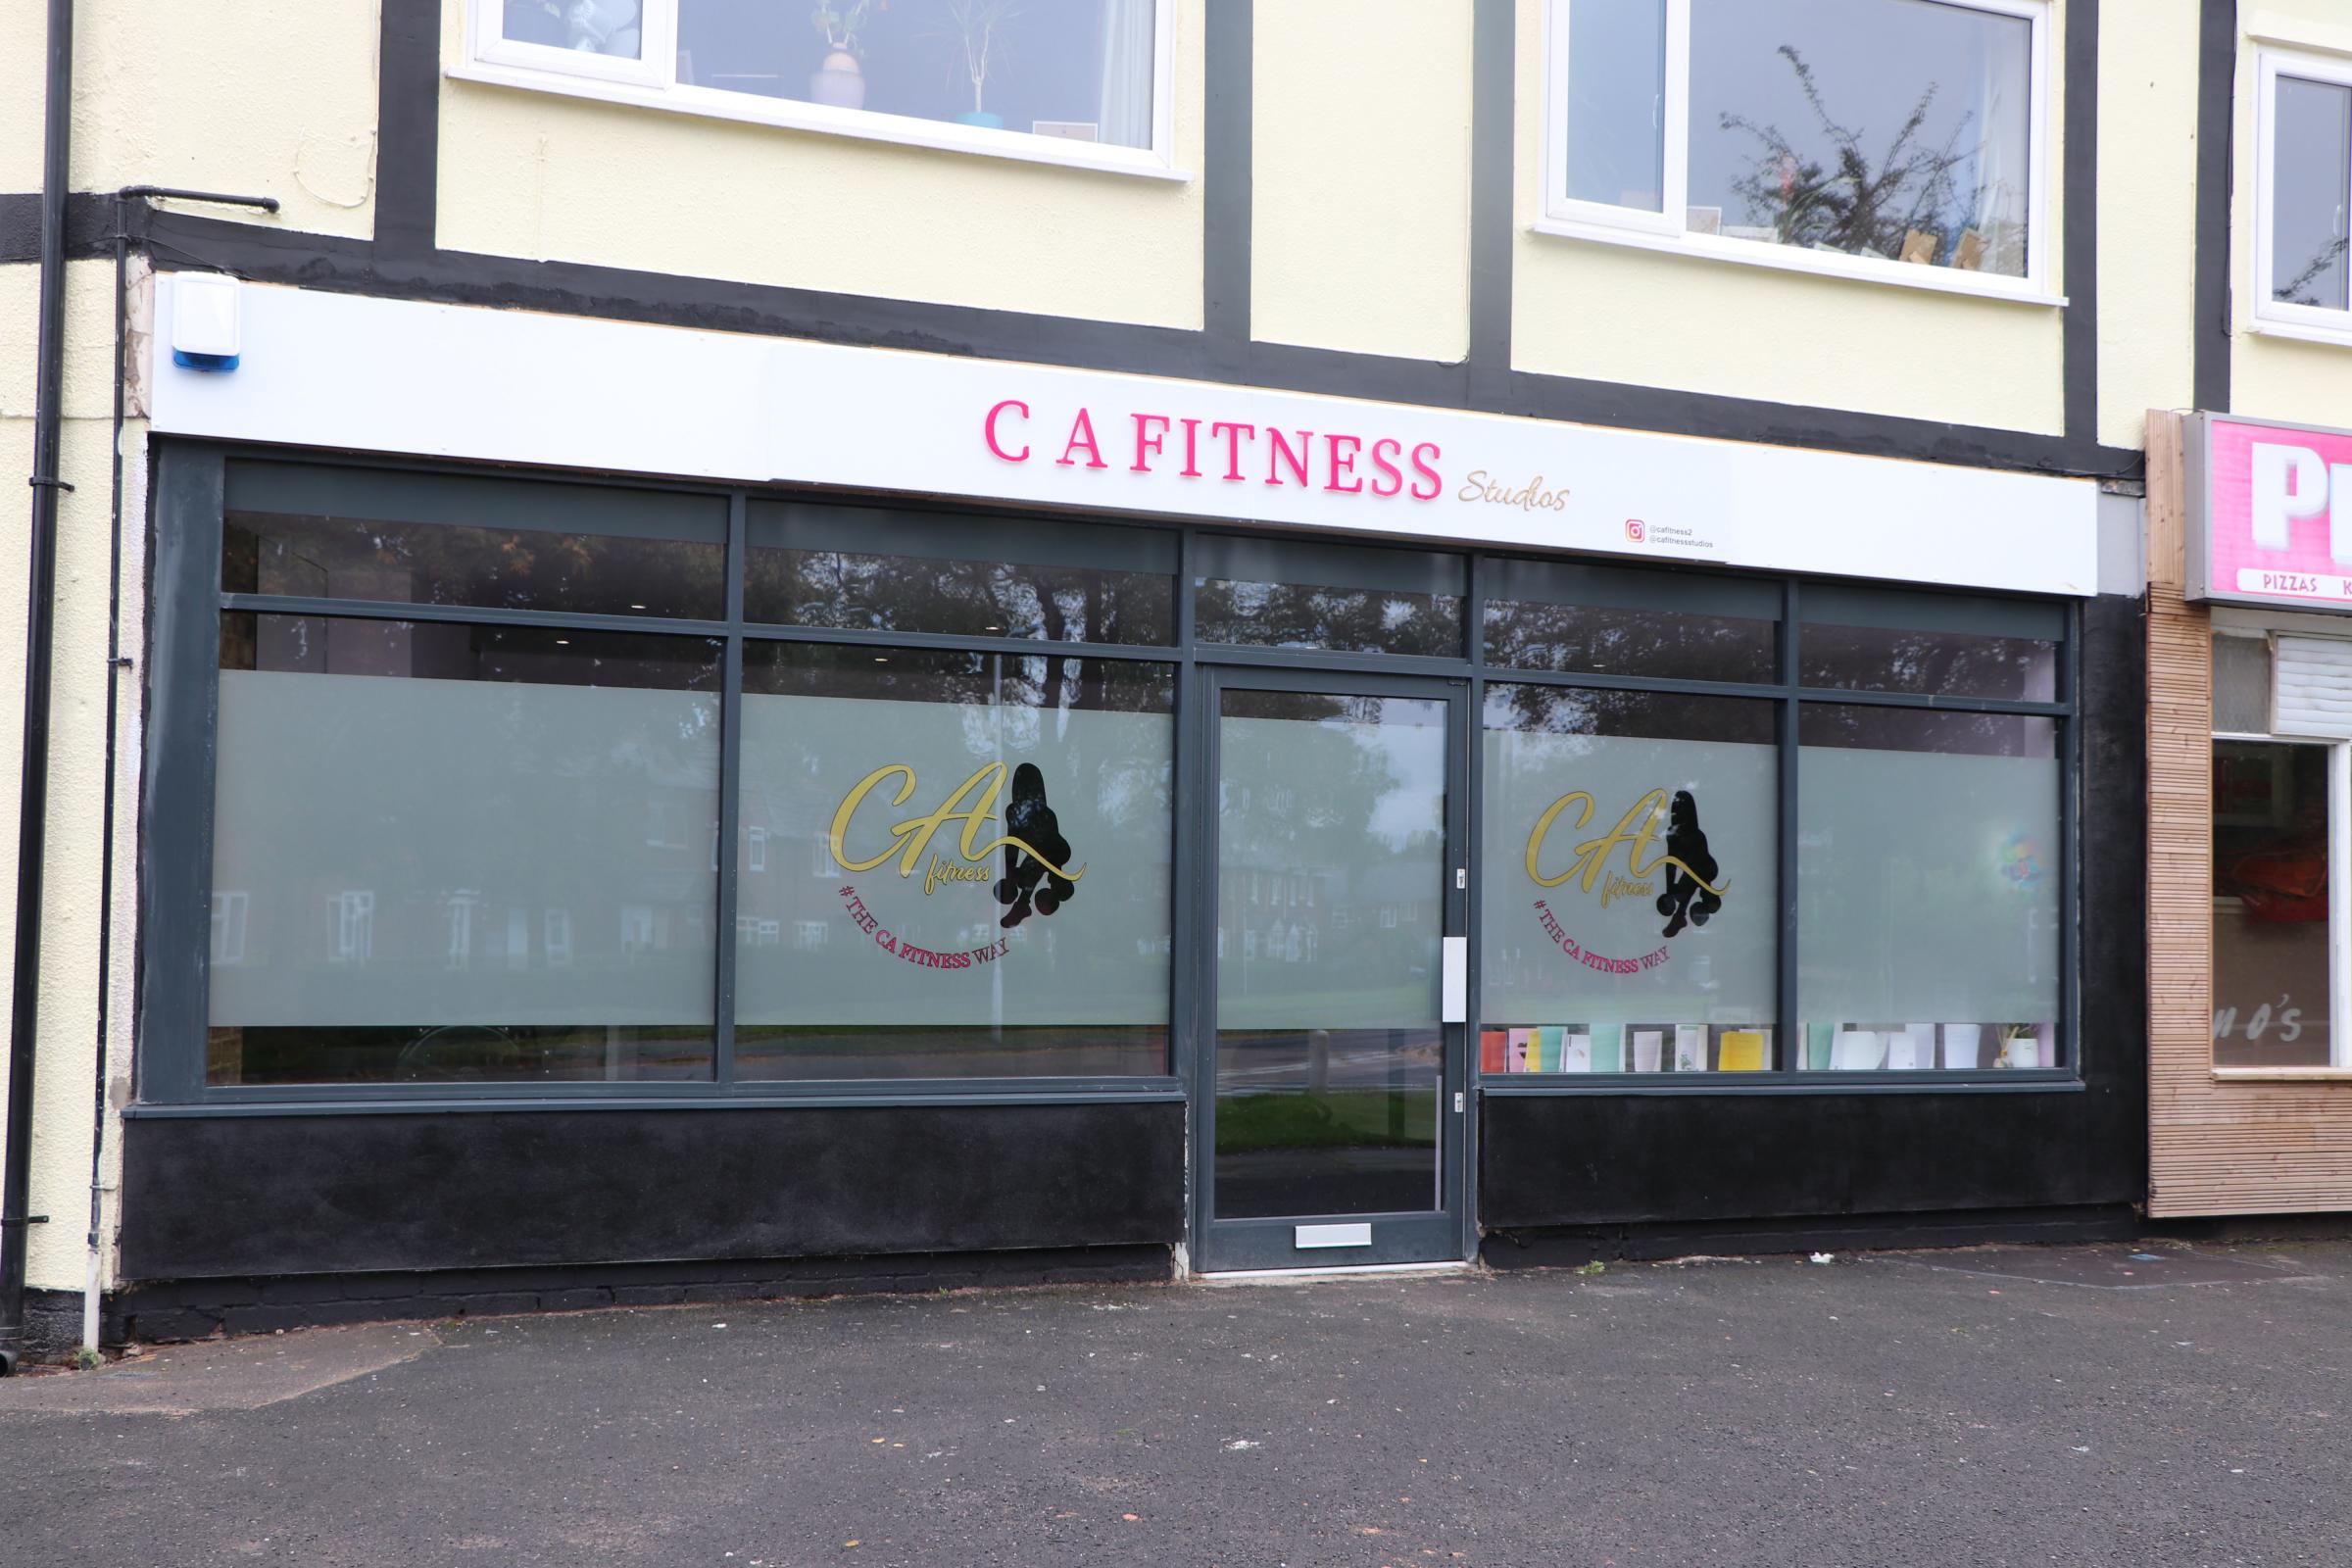 CA Fitness has recently opened at the row of shops on the corner of Acre Lane and Dawpool Drive